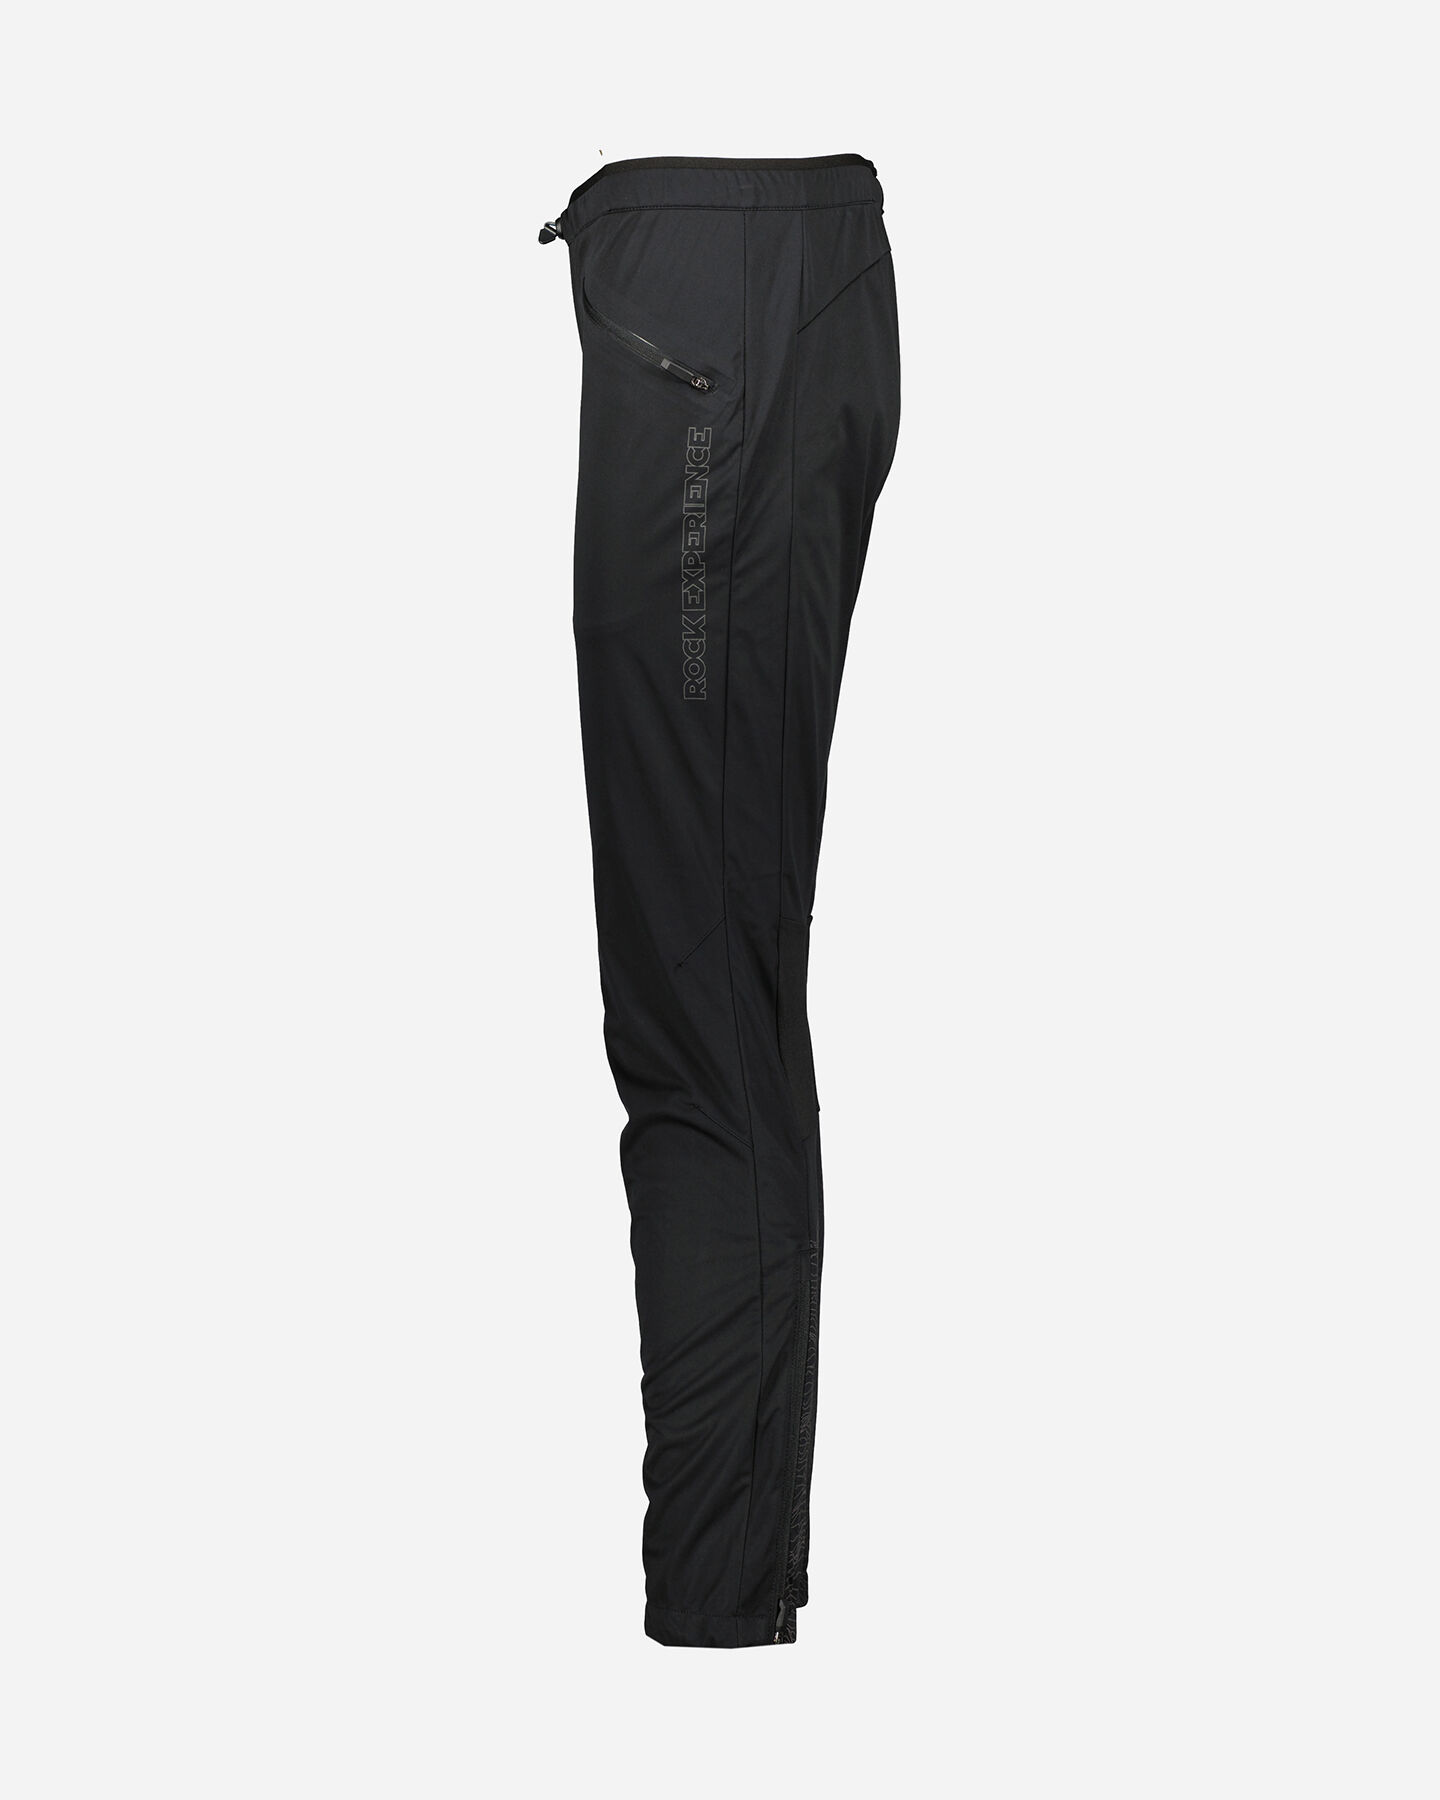  Pantalone outdoor ROCK EXPERIENCE FERRET W S4098970|0208|XS scatto 1